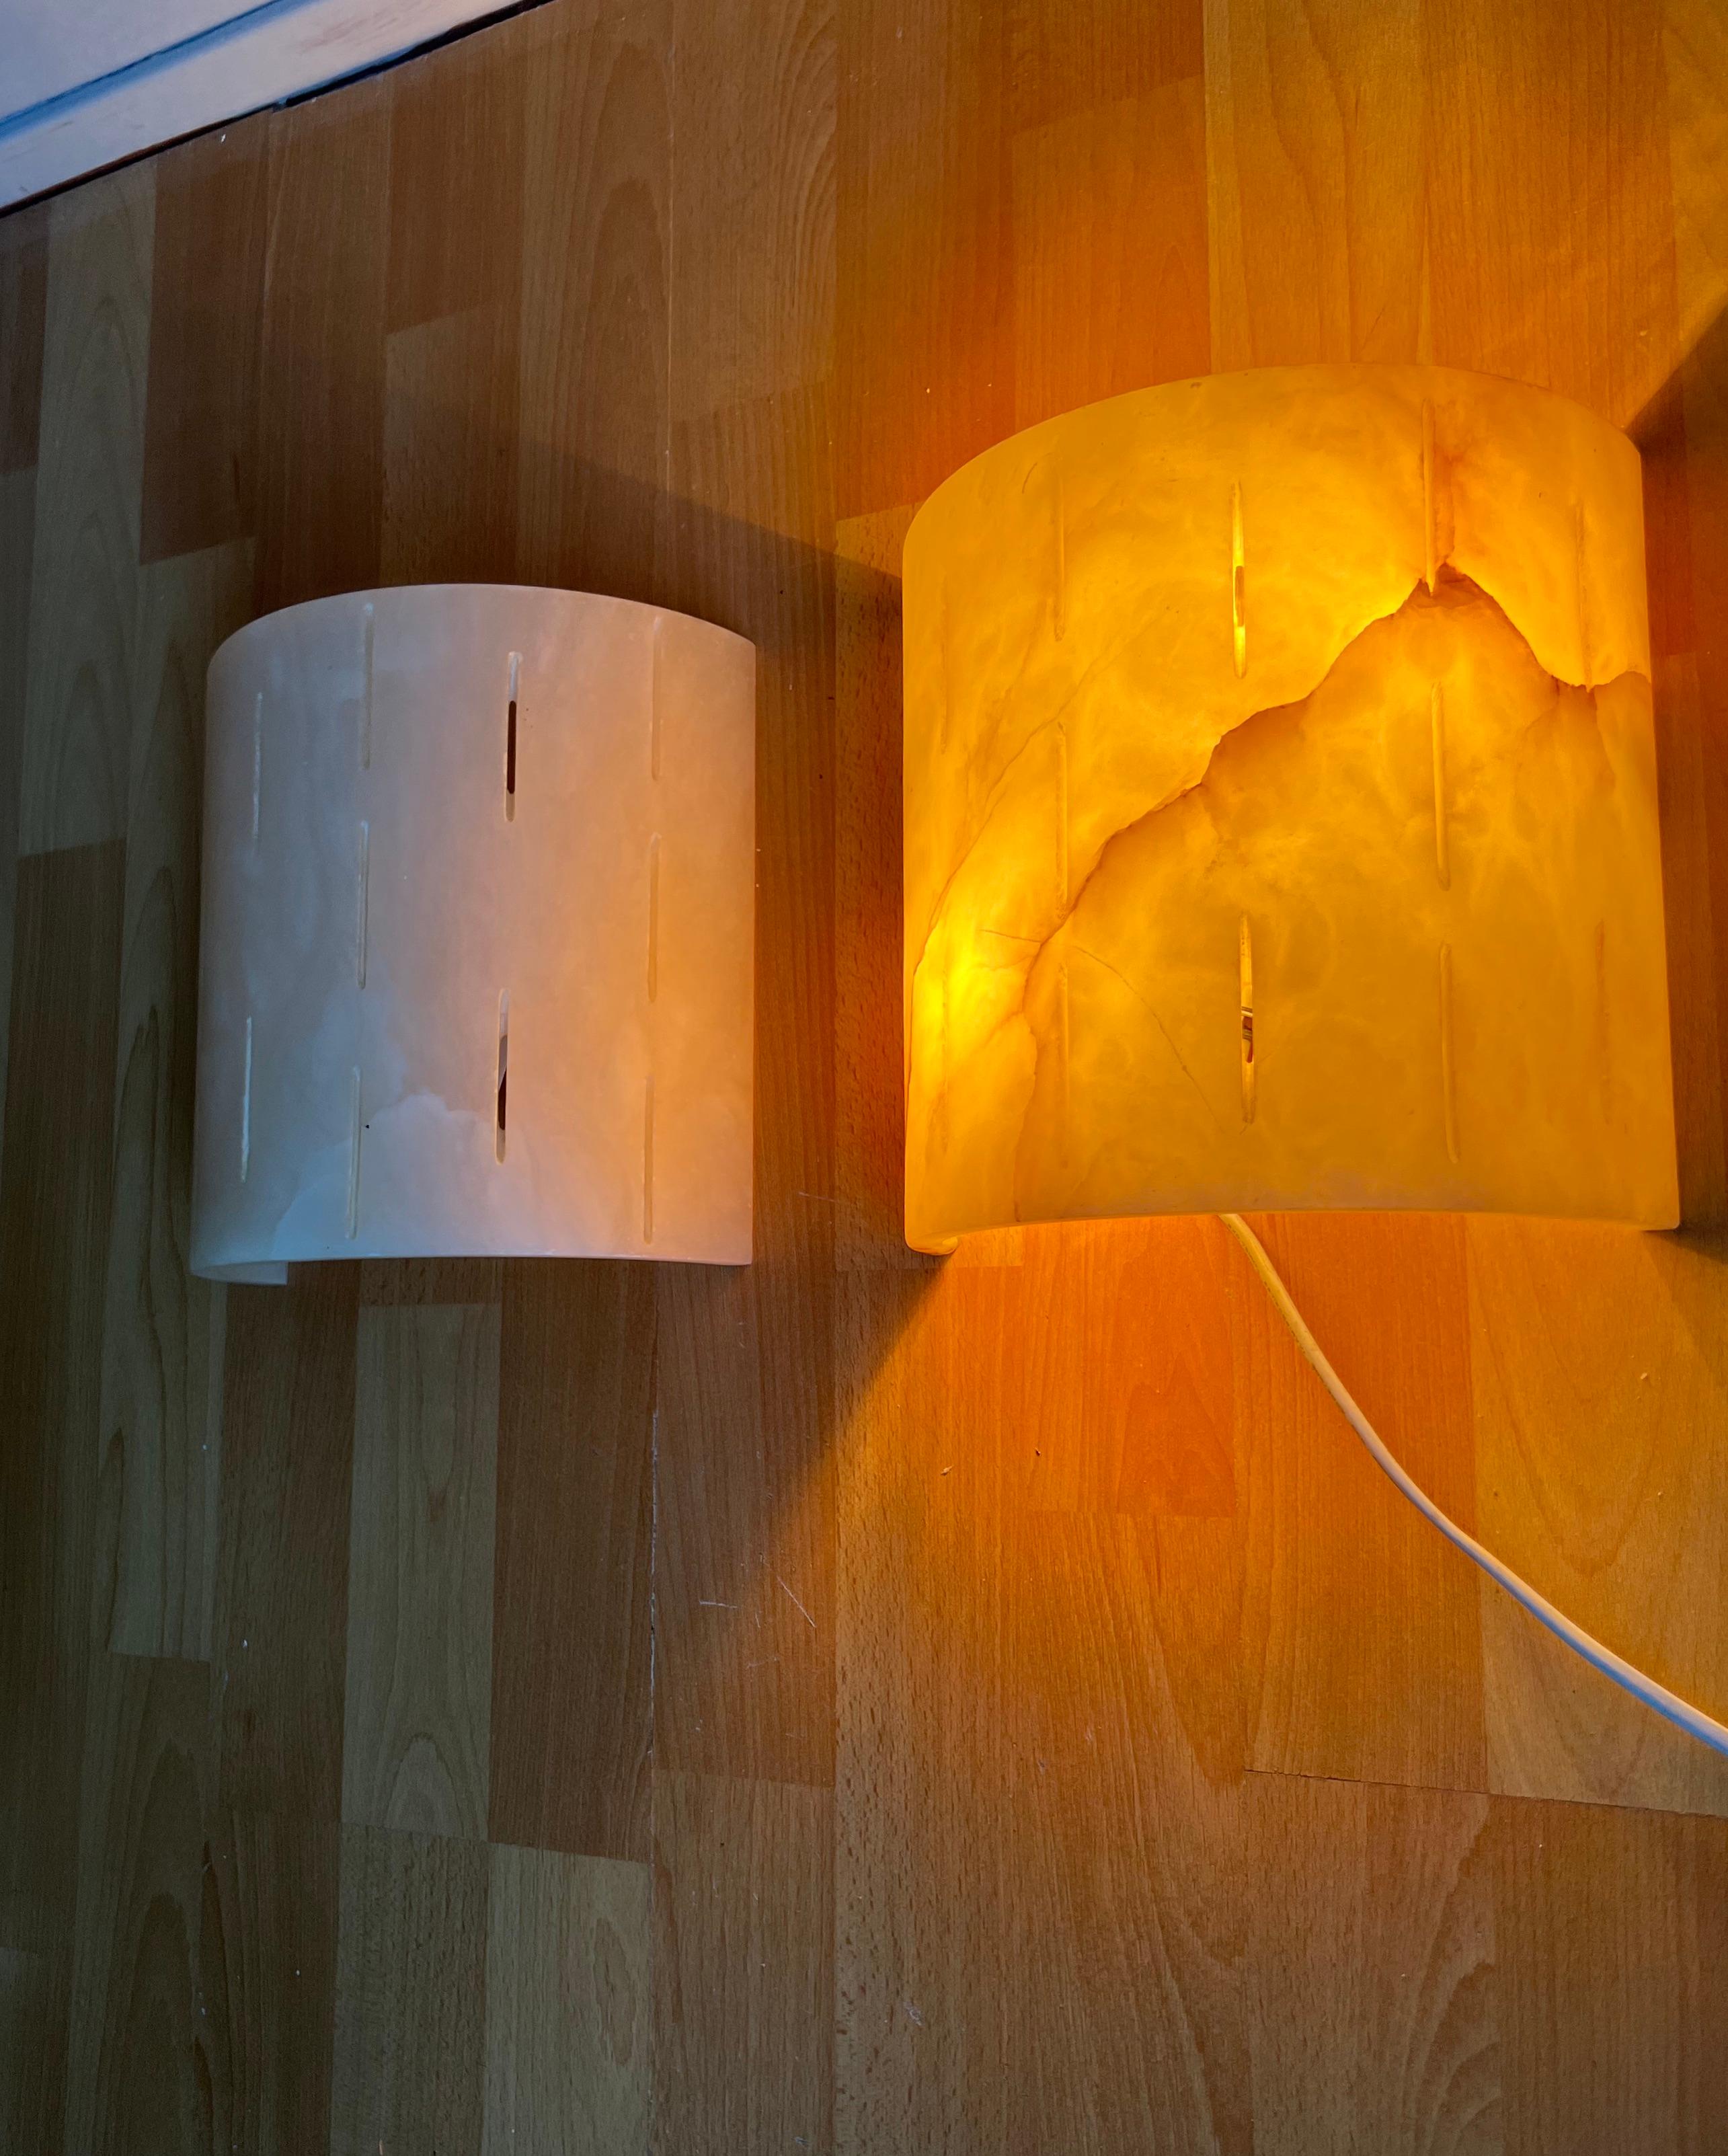 Timeless Design Pair of Art Deco Style Alabaster Wall Sconces / Light Fixtures In Excellent Condition For Sale In Lisse, NL